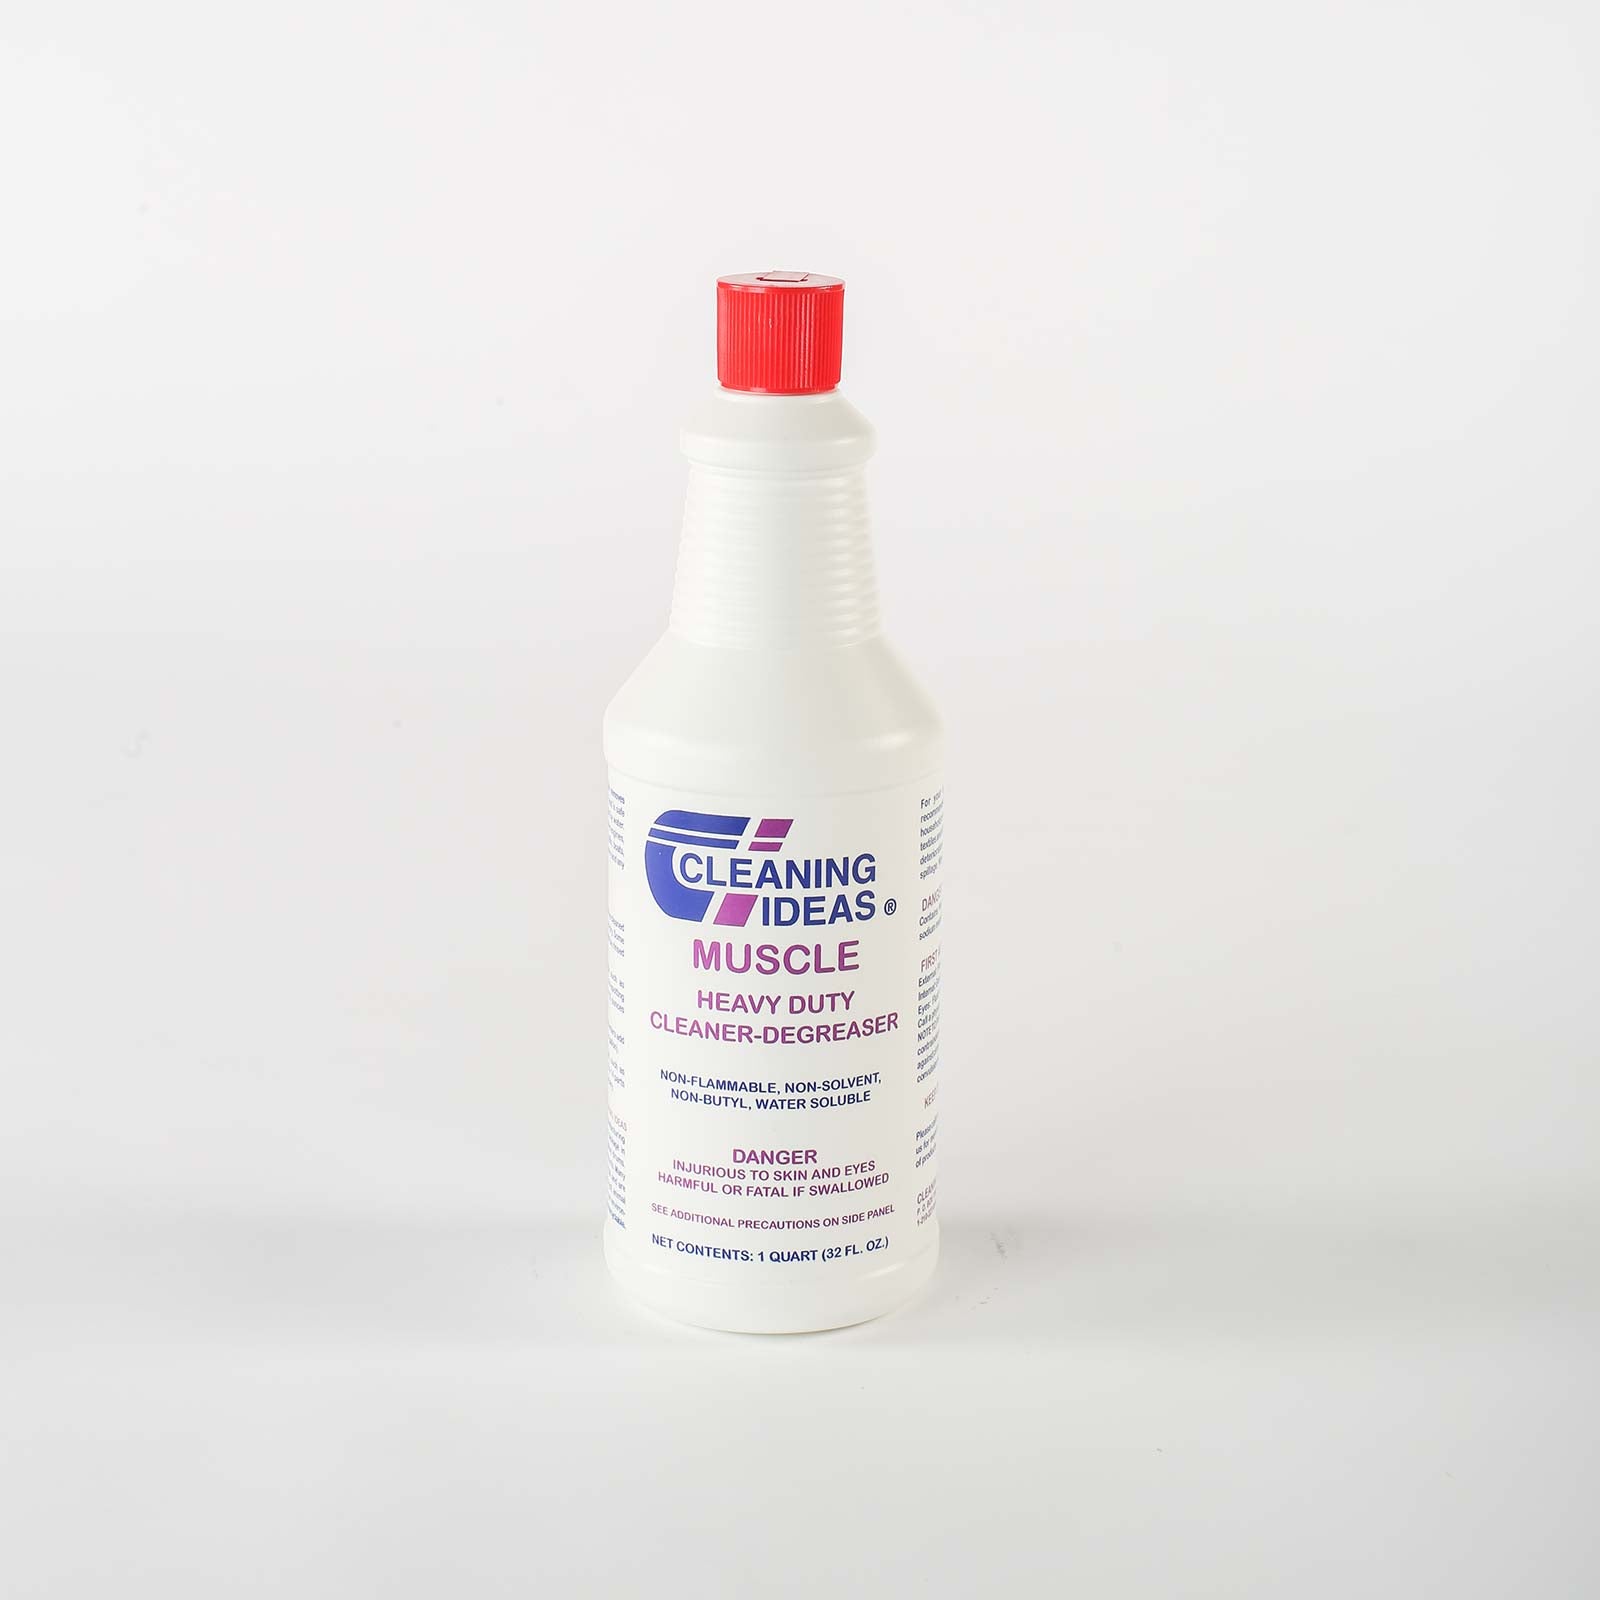 Muscle Cleaner / Degreaser